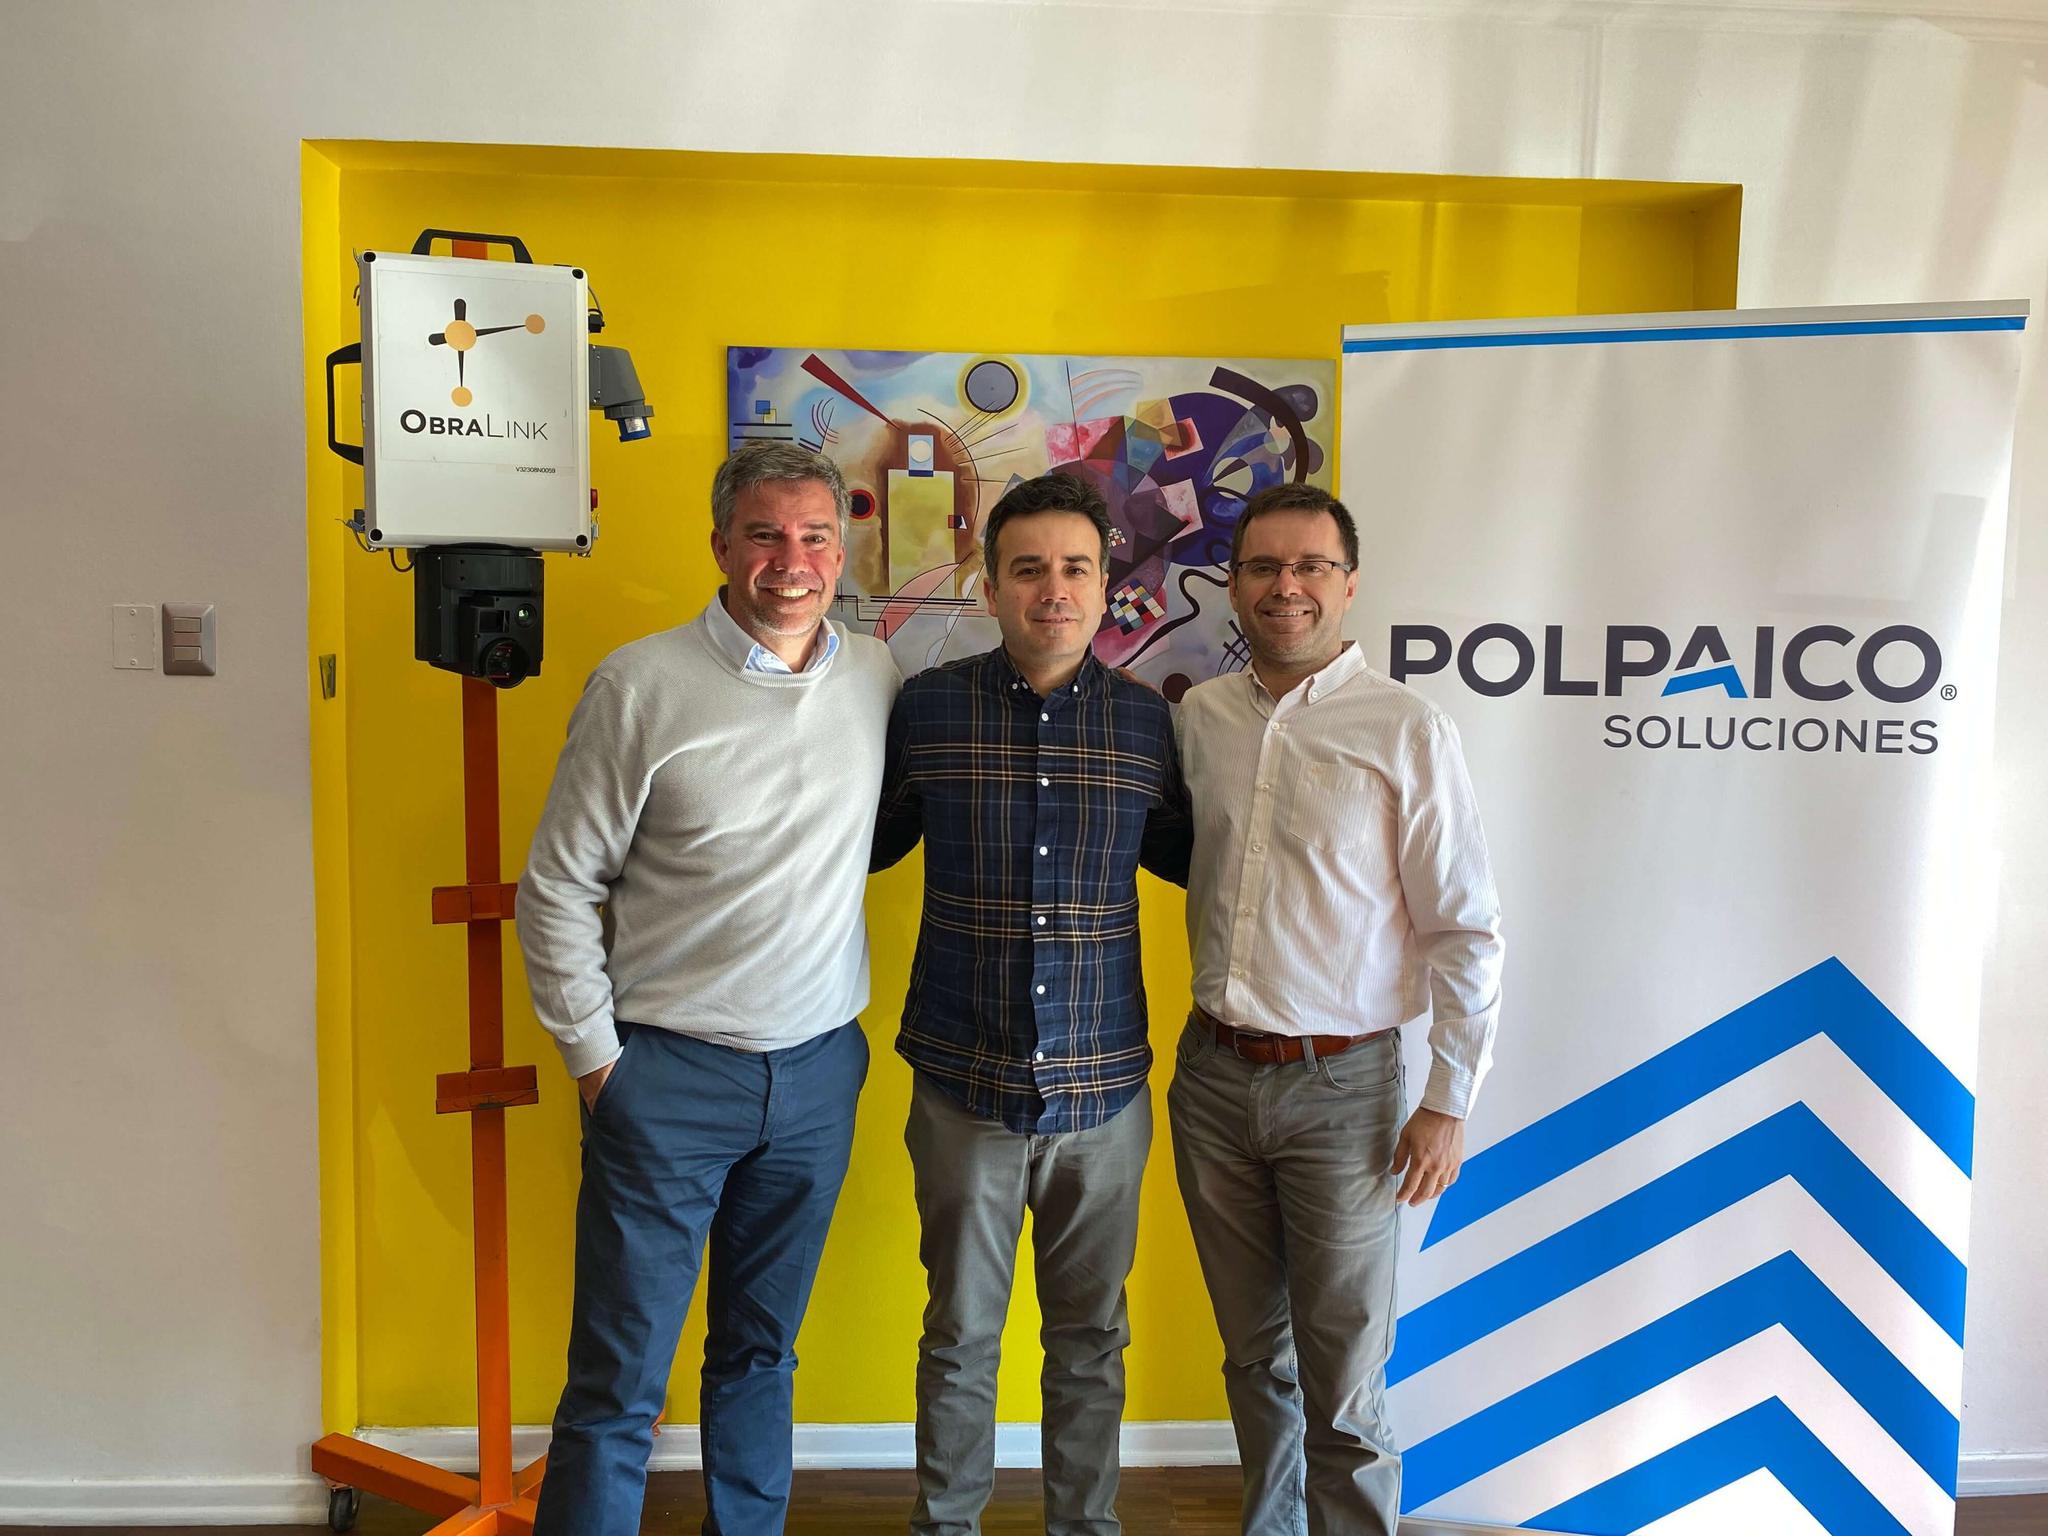 Polpaico Soluciones invests in Startup ObraLink to incorporate innovative technology in the monitoring of construction projects